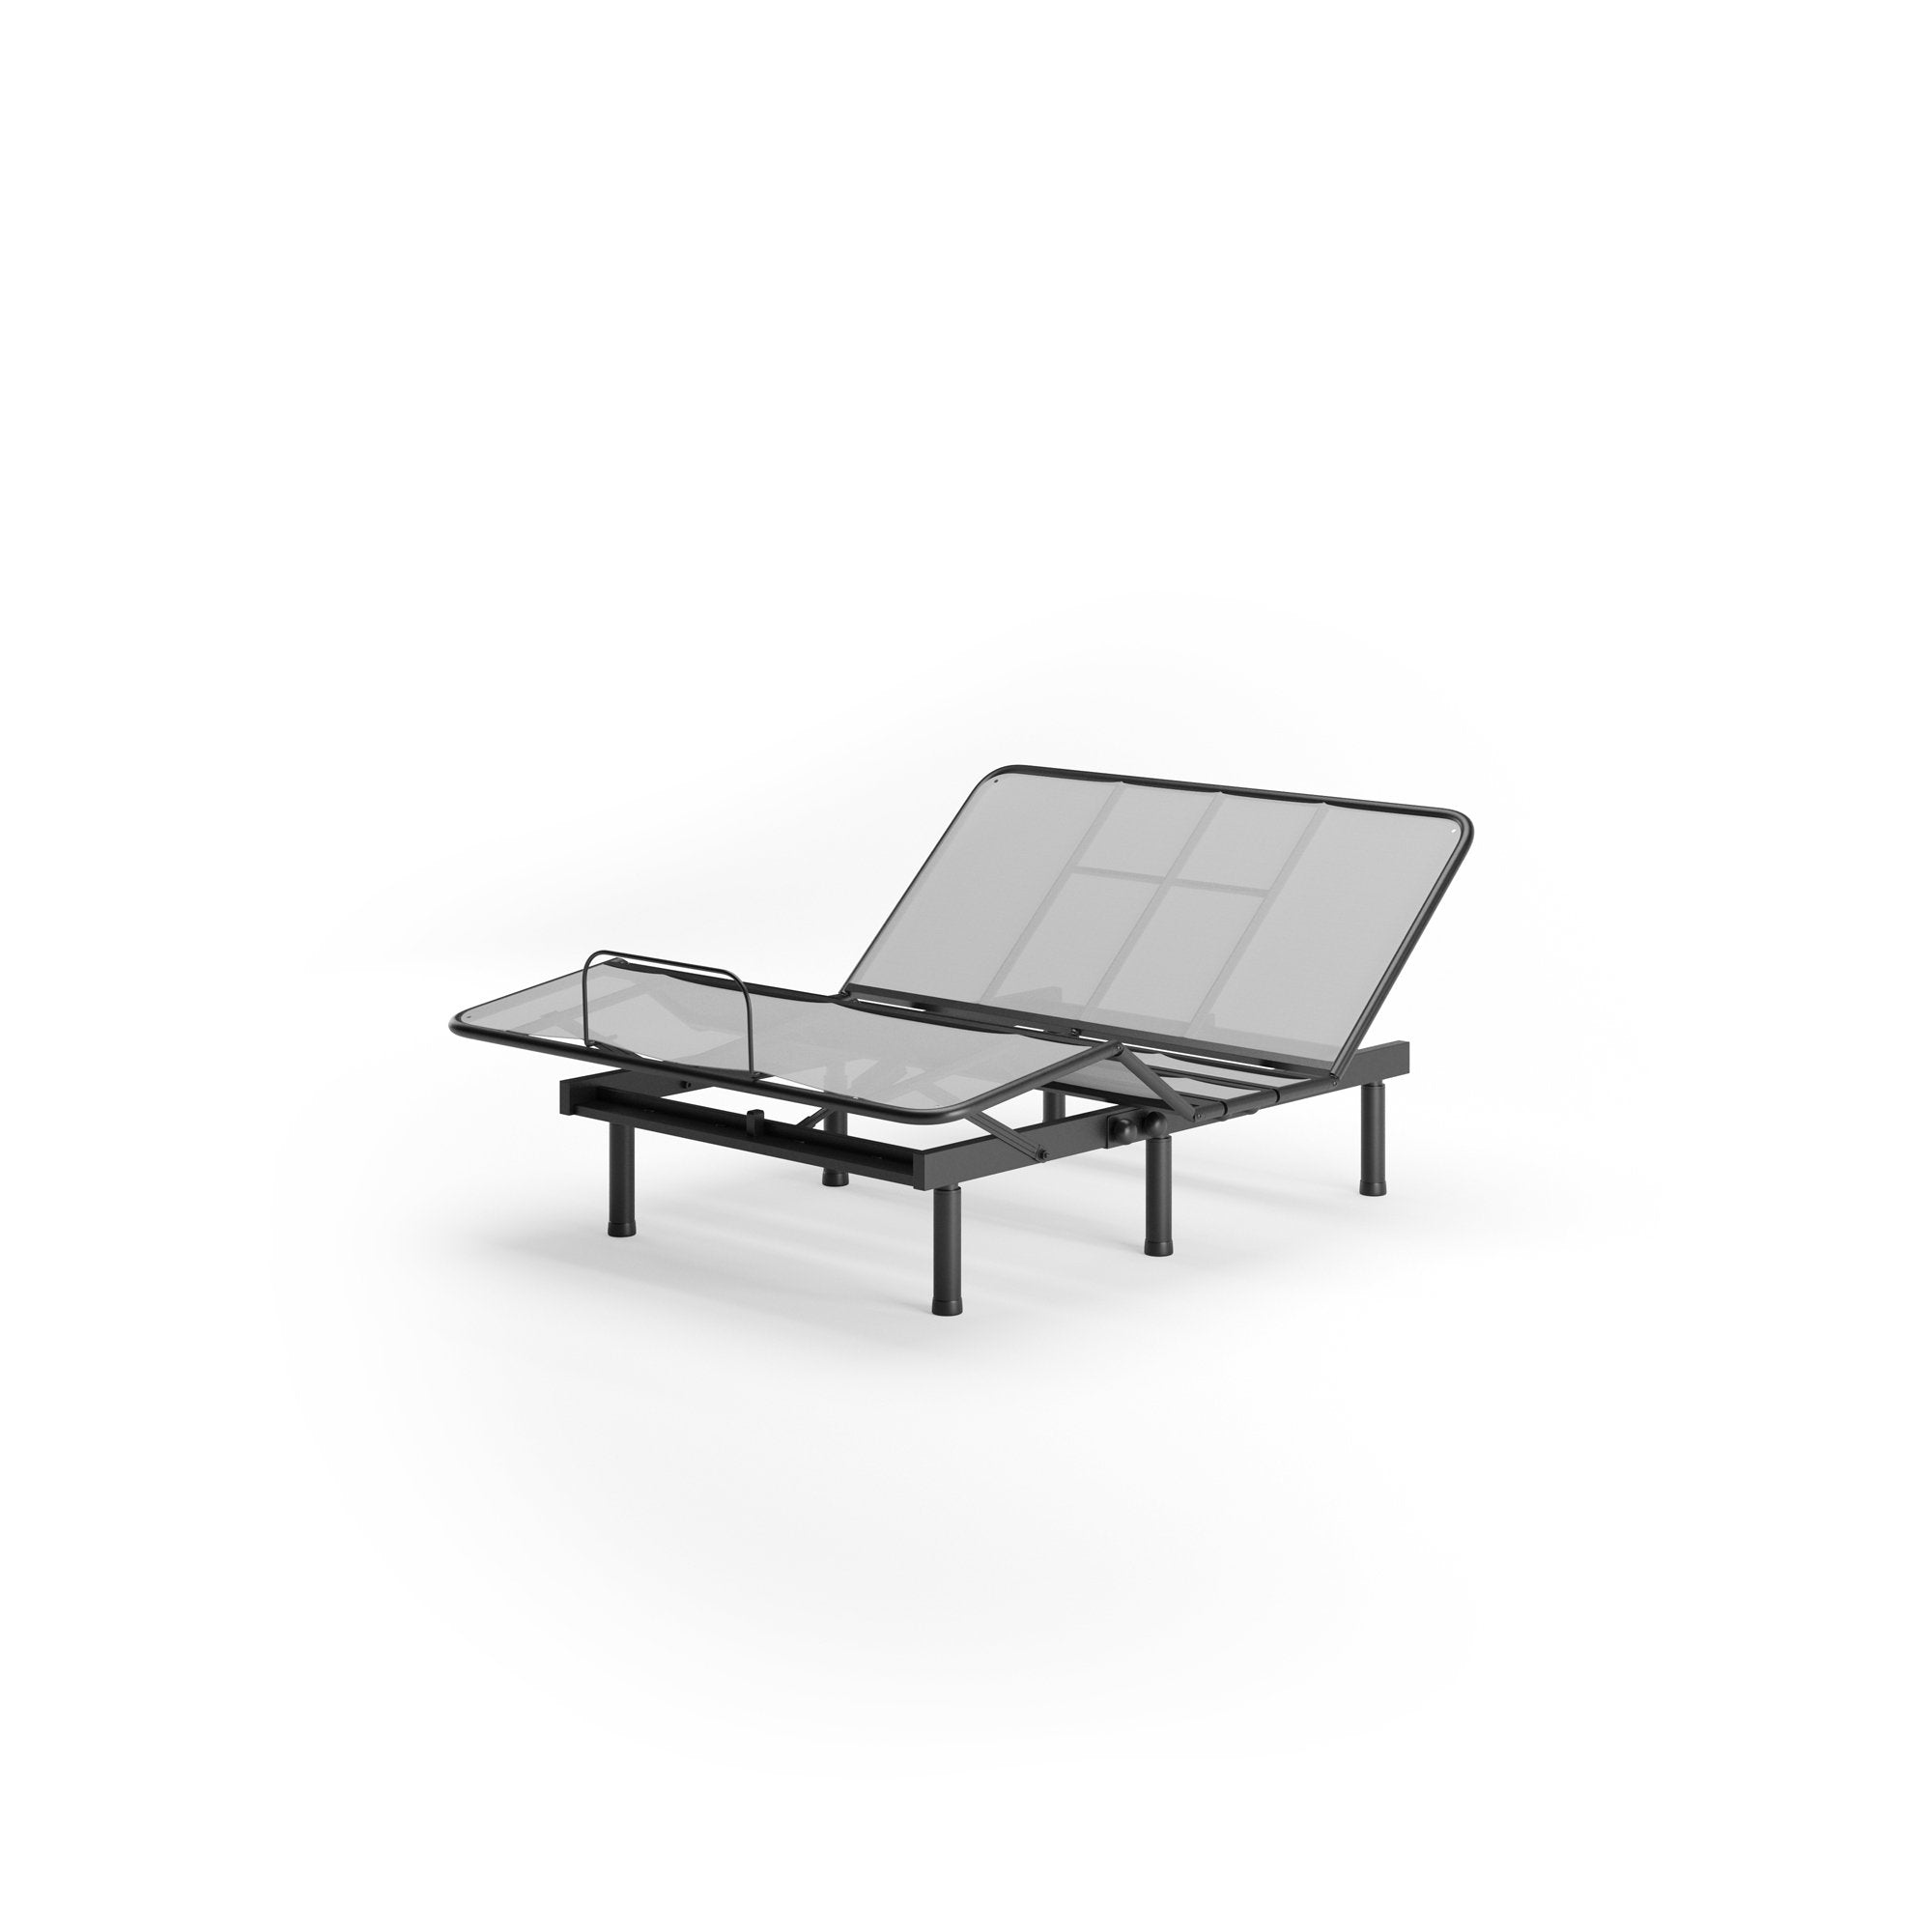 Featherlite Metal Adjustable Bed Frame with Zero-Gravity Positioning